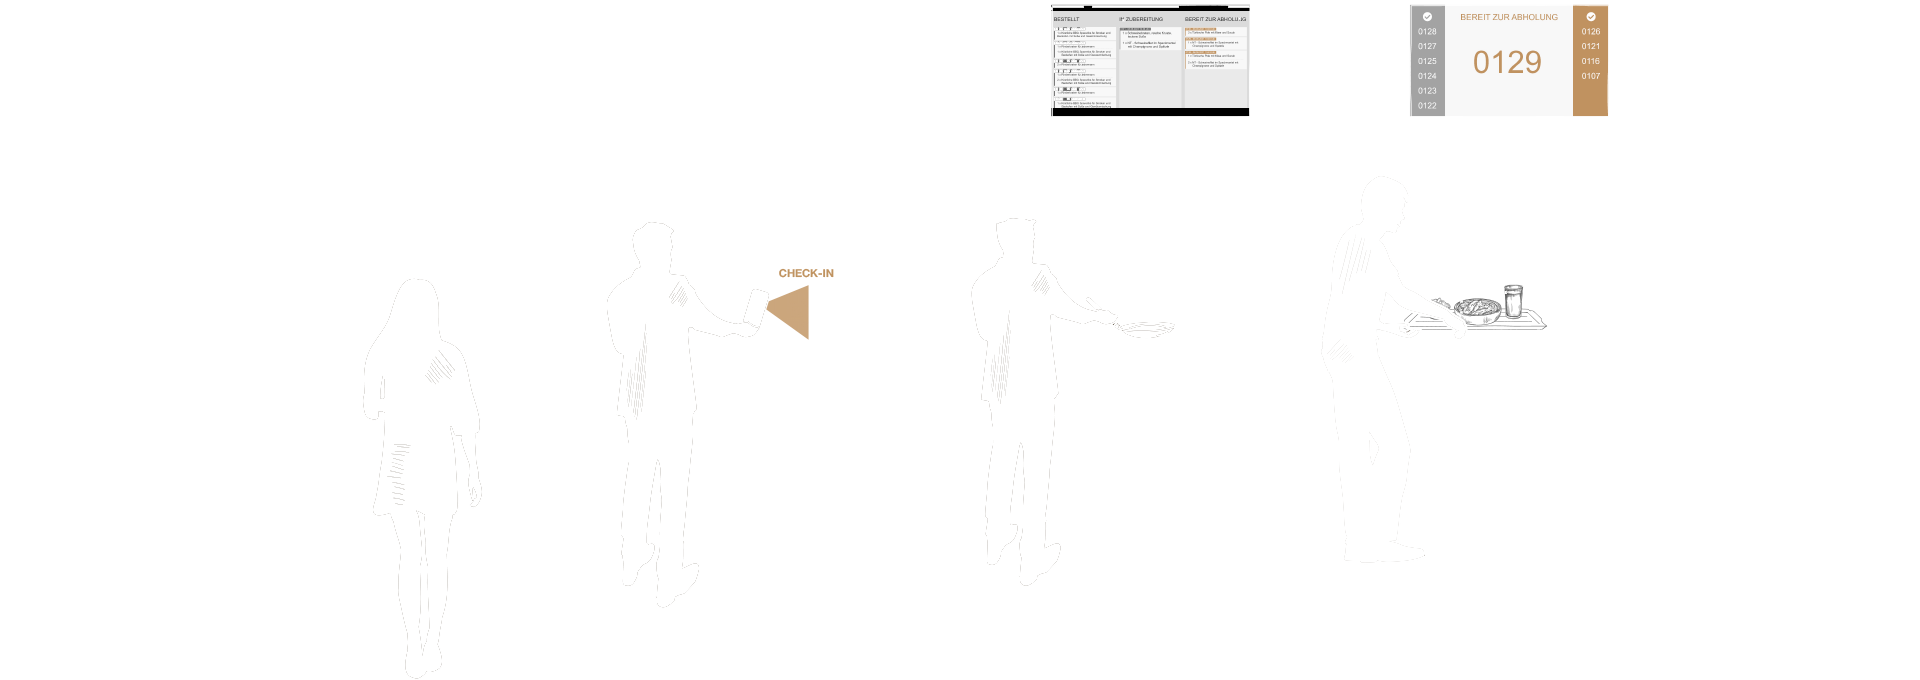 kamasys graphic: Check-in at the entrance of the company restaurant